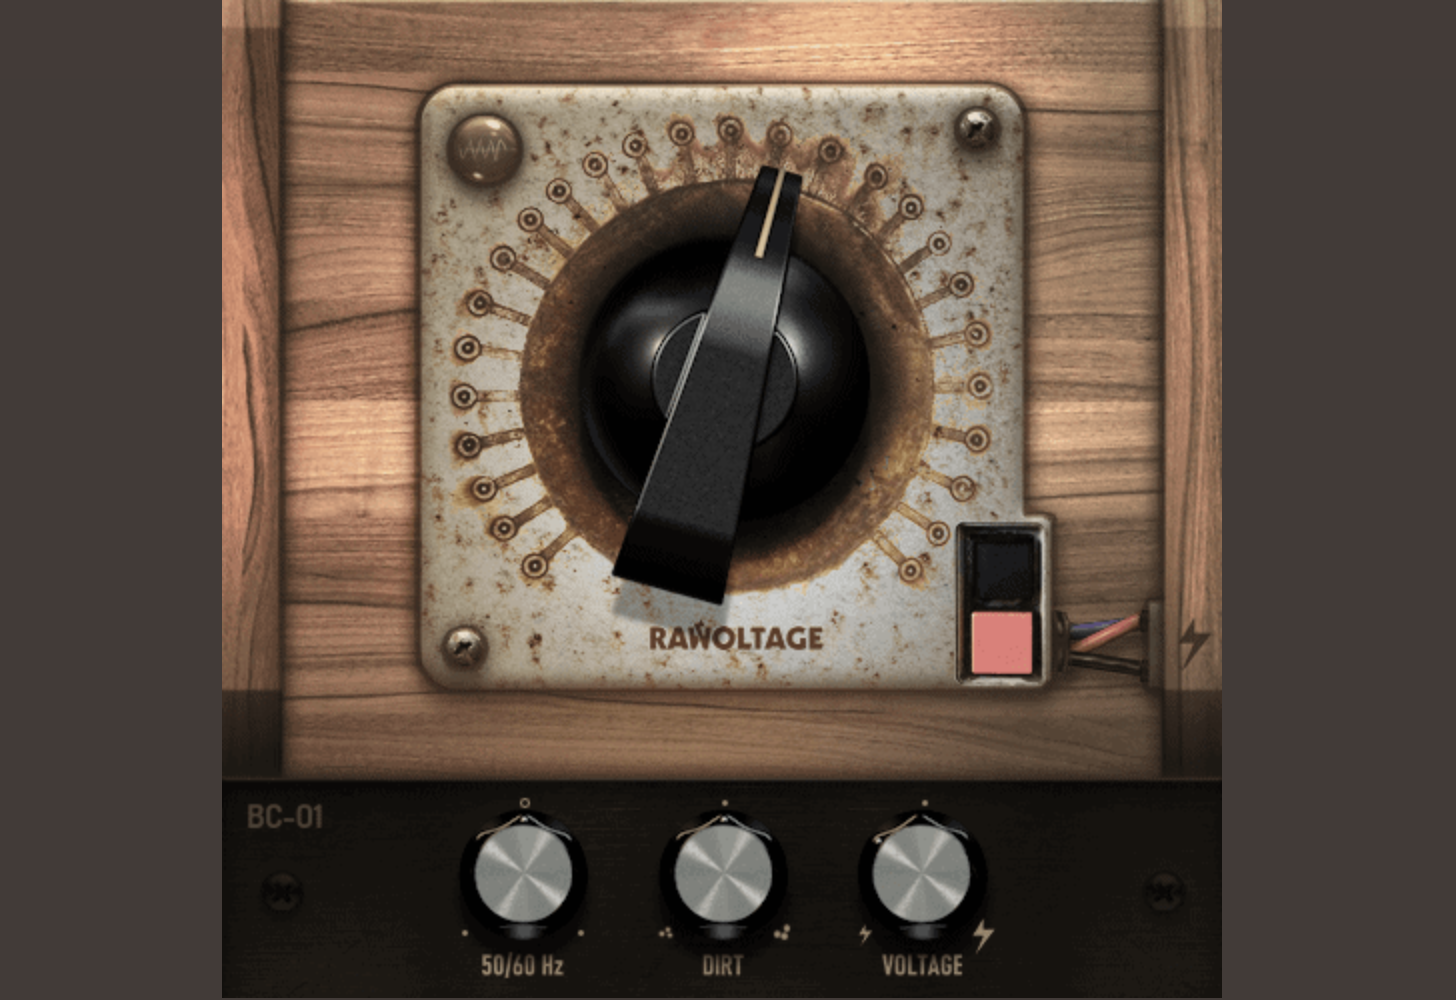 Make gnarly sound choices and live dangerously with the Bad Contact free lofi VST plugin